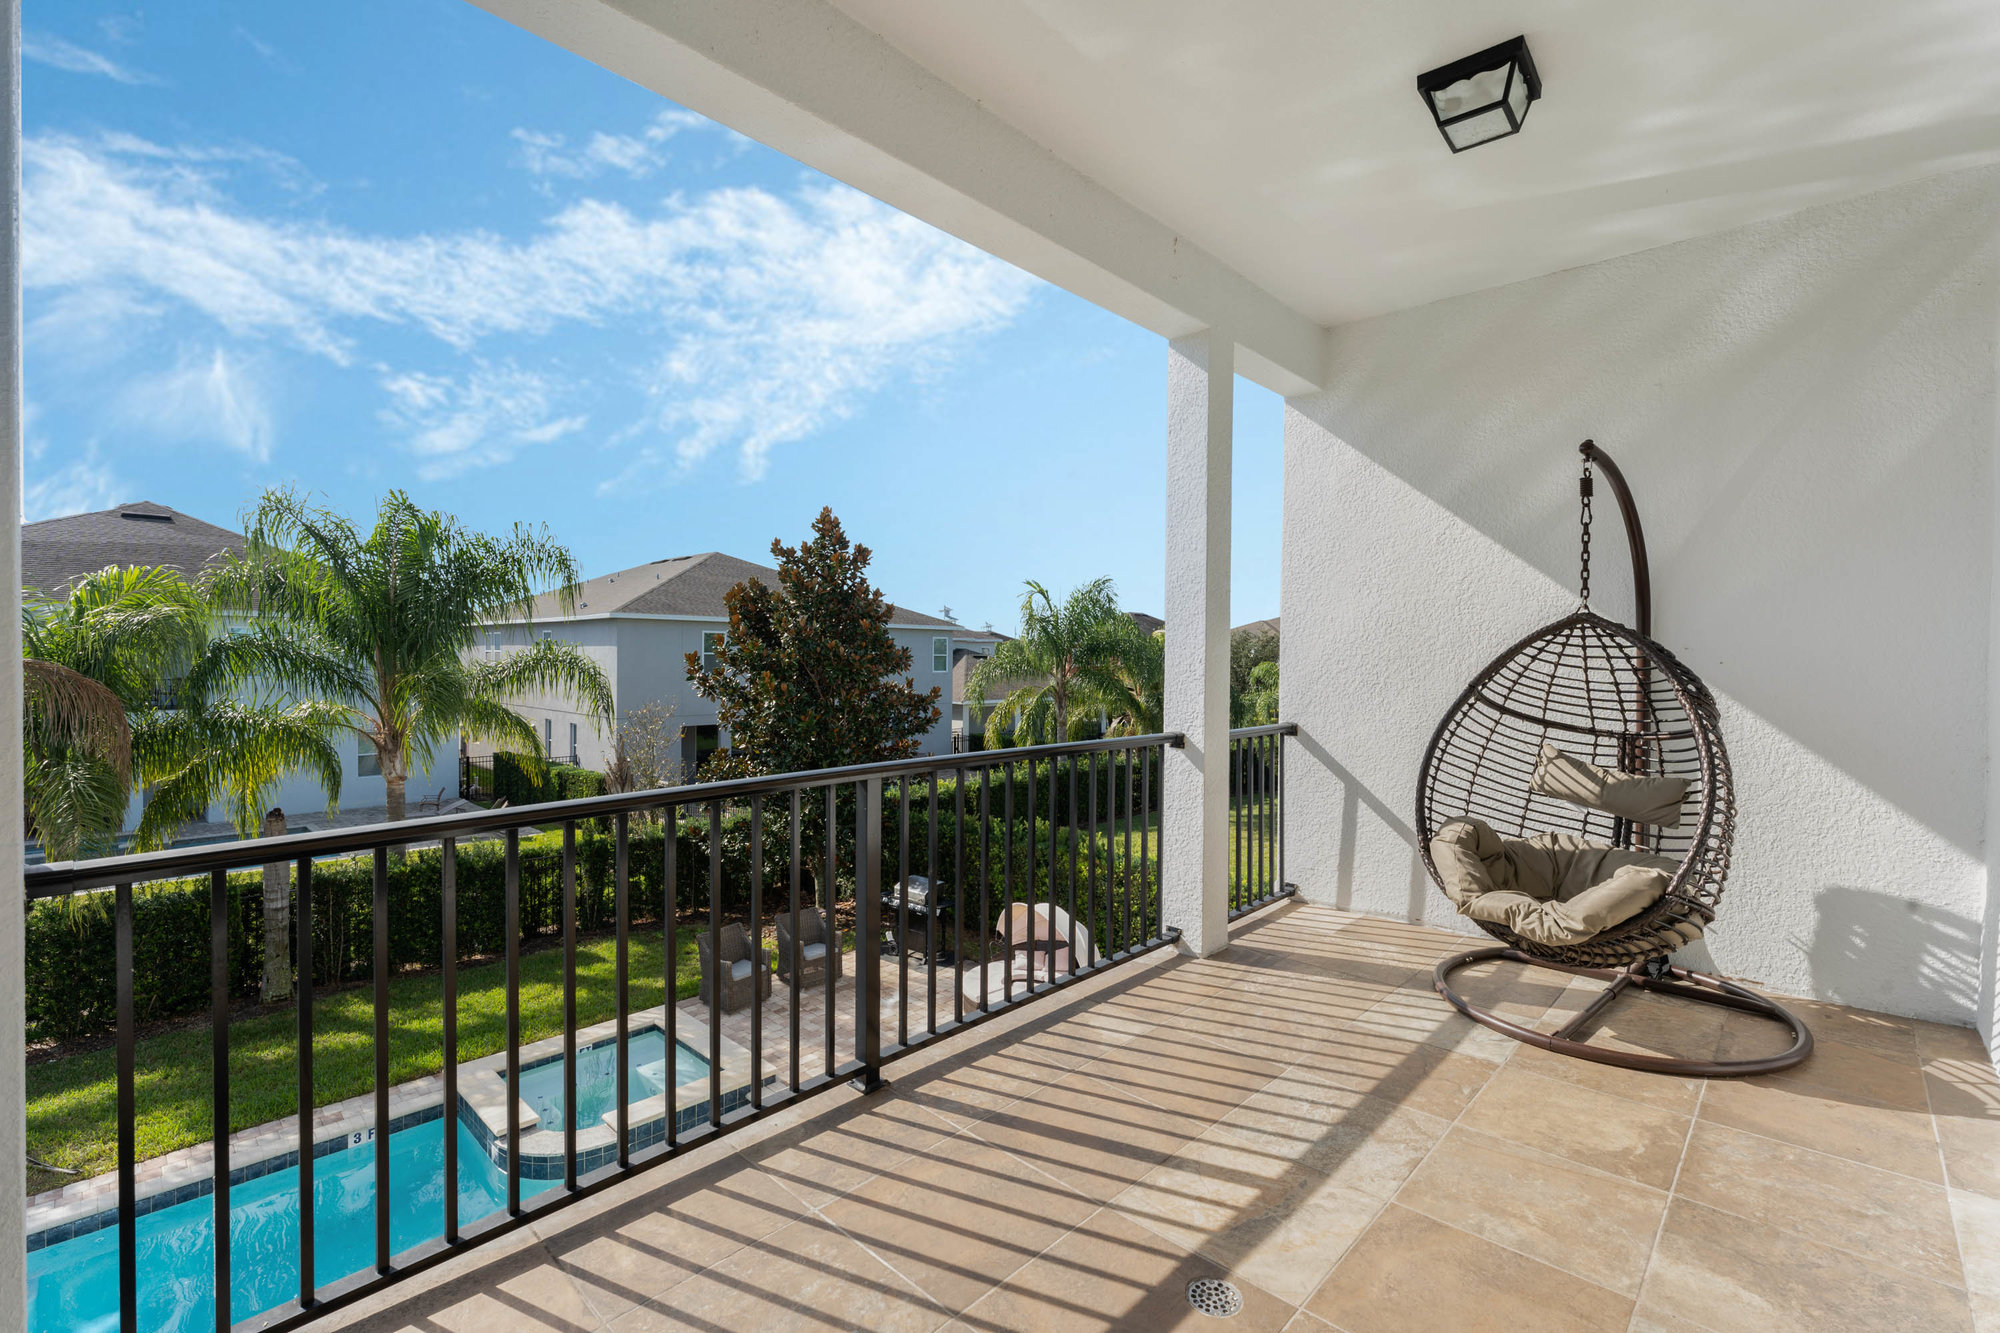 upstairs balcony with nest hanging chair overlooking pool